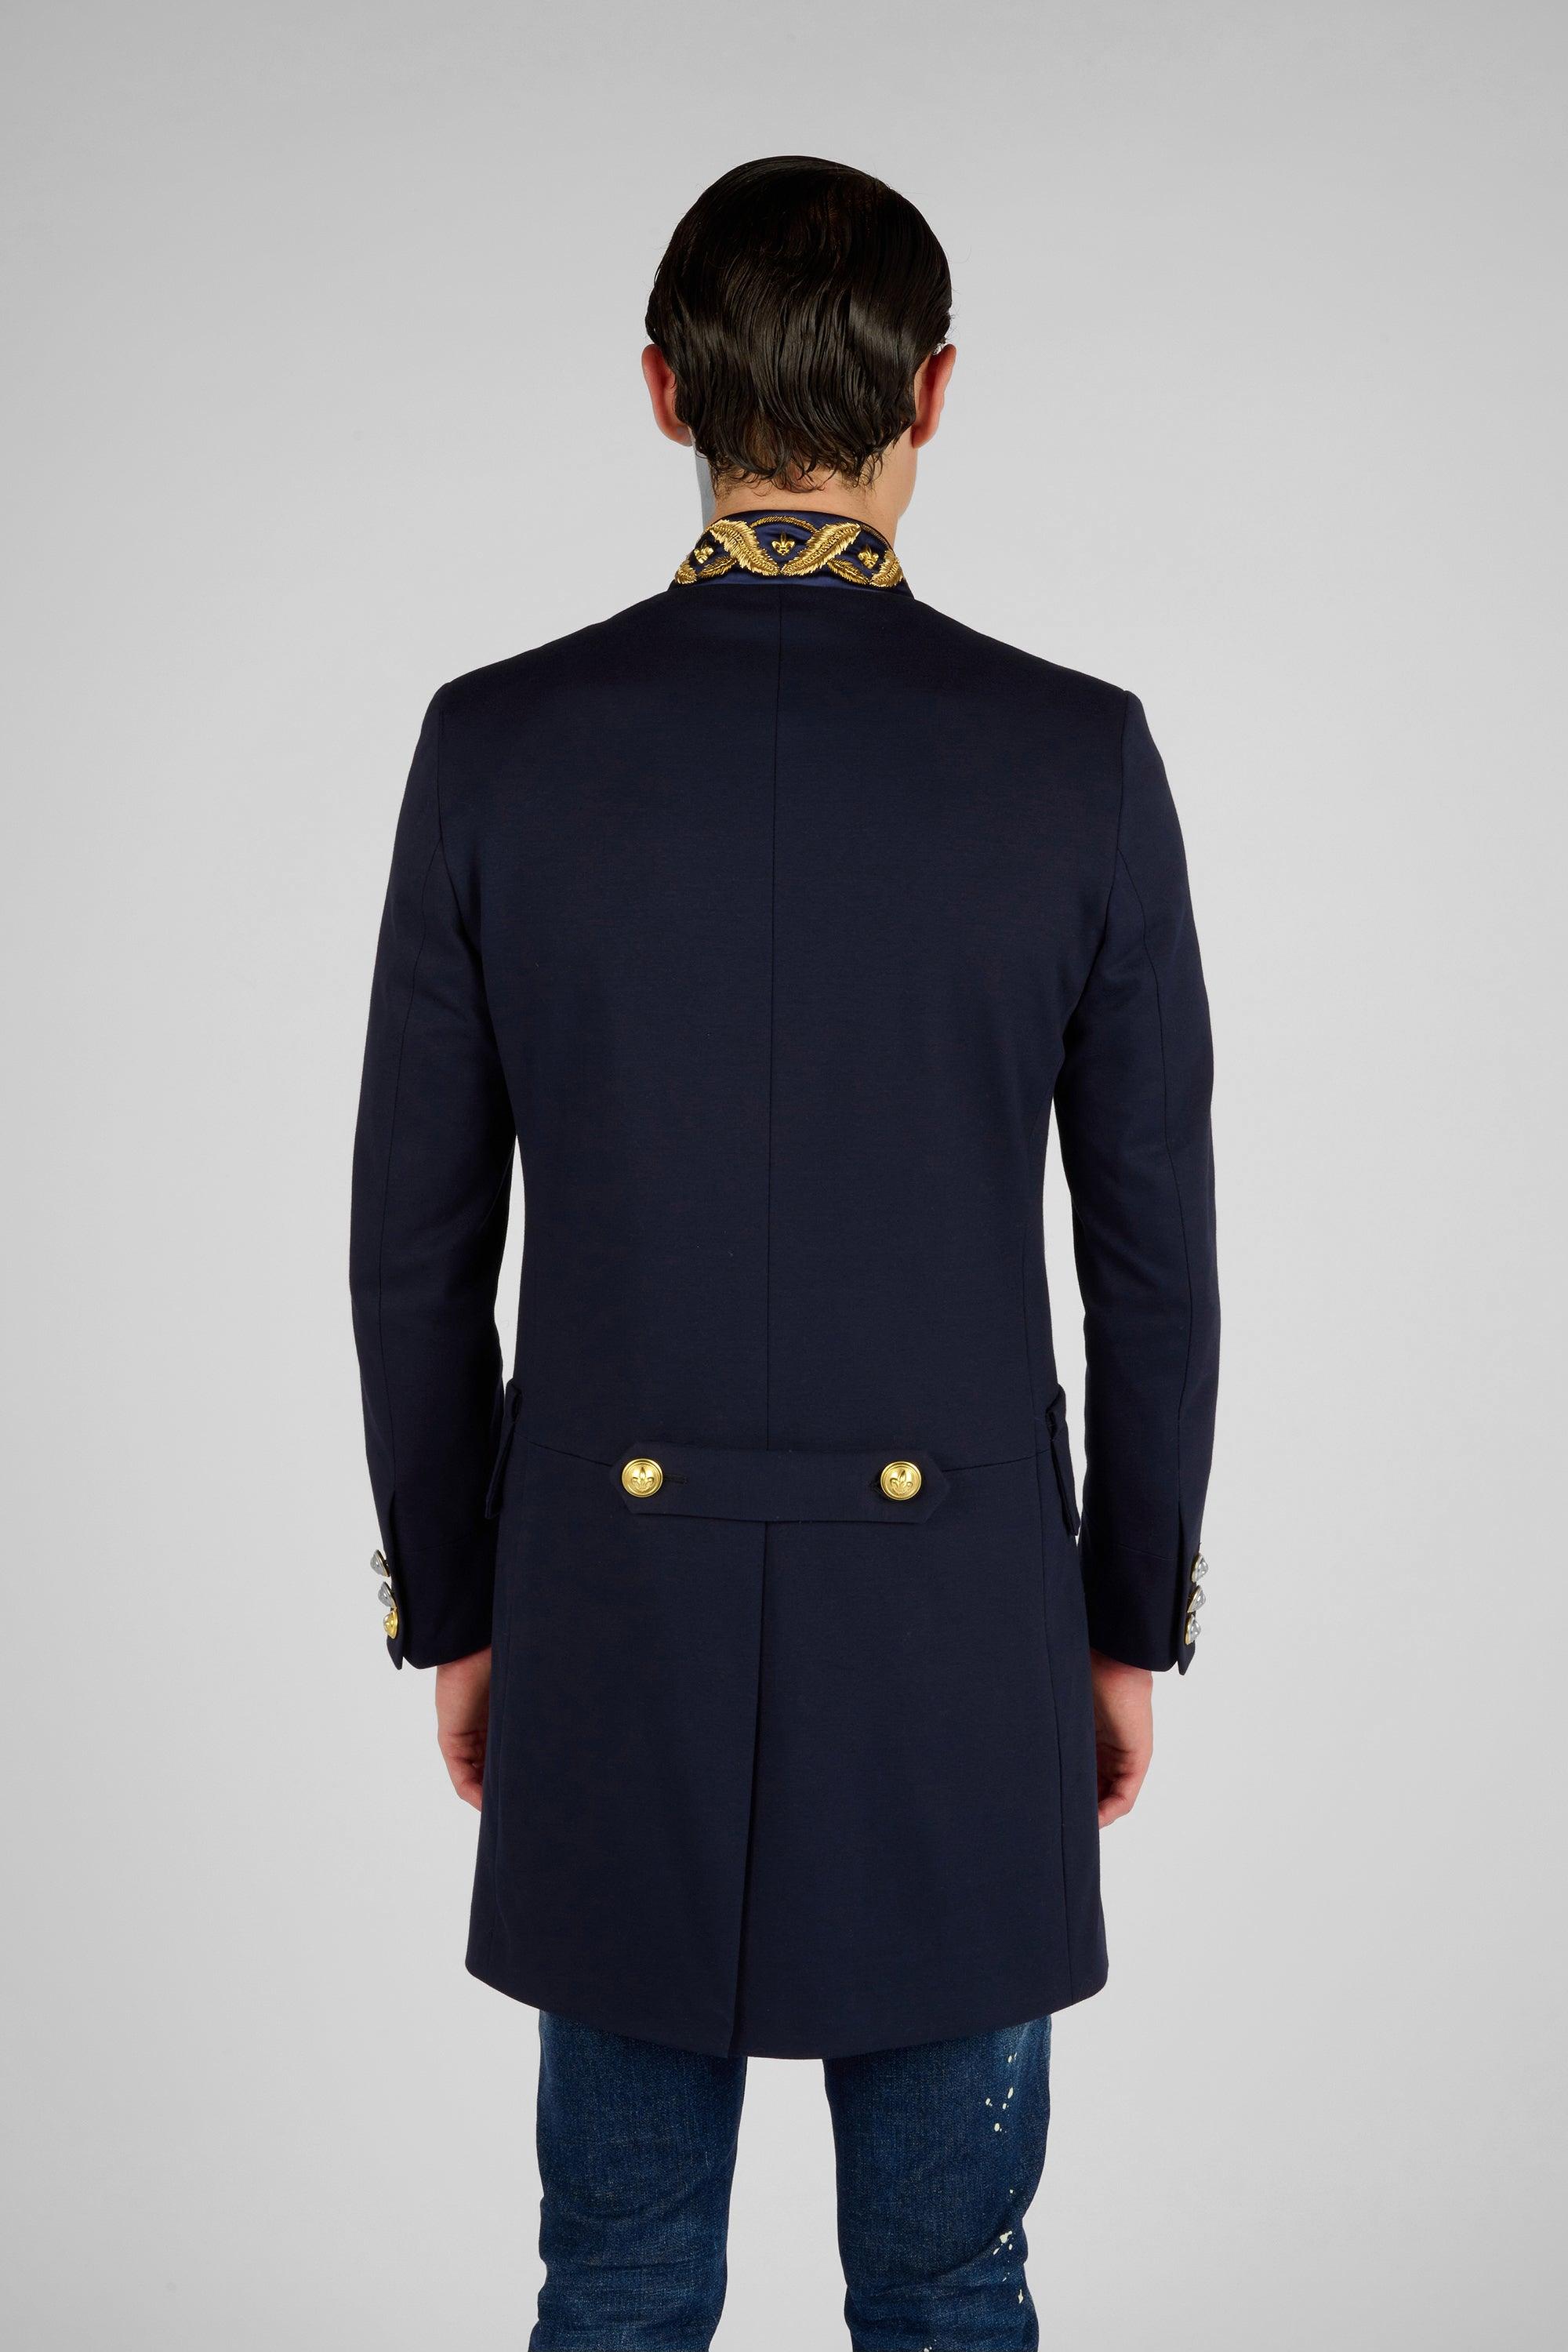 MANTEAU MILITAIRE BRODE LONG - Lords & Fools broderies, dandy, frenchstyle, menfashion, militaire, Mood_Military, paris, parisianstyle, S24, suit, SUMMER 2024, tailoring